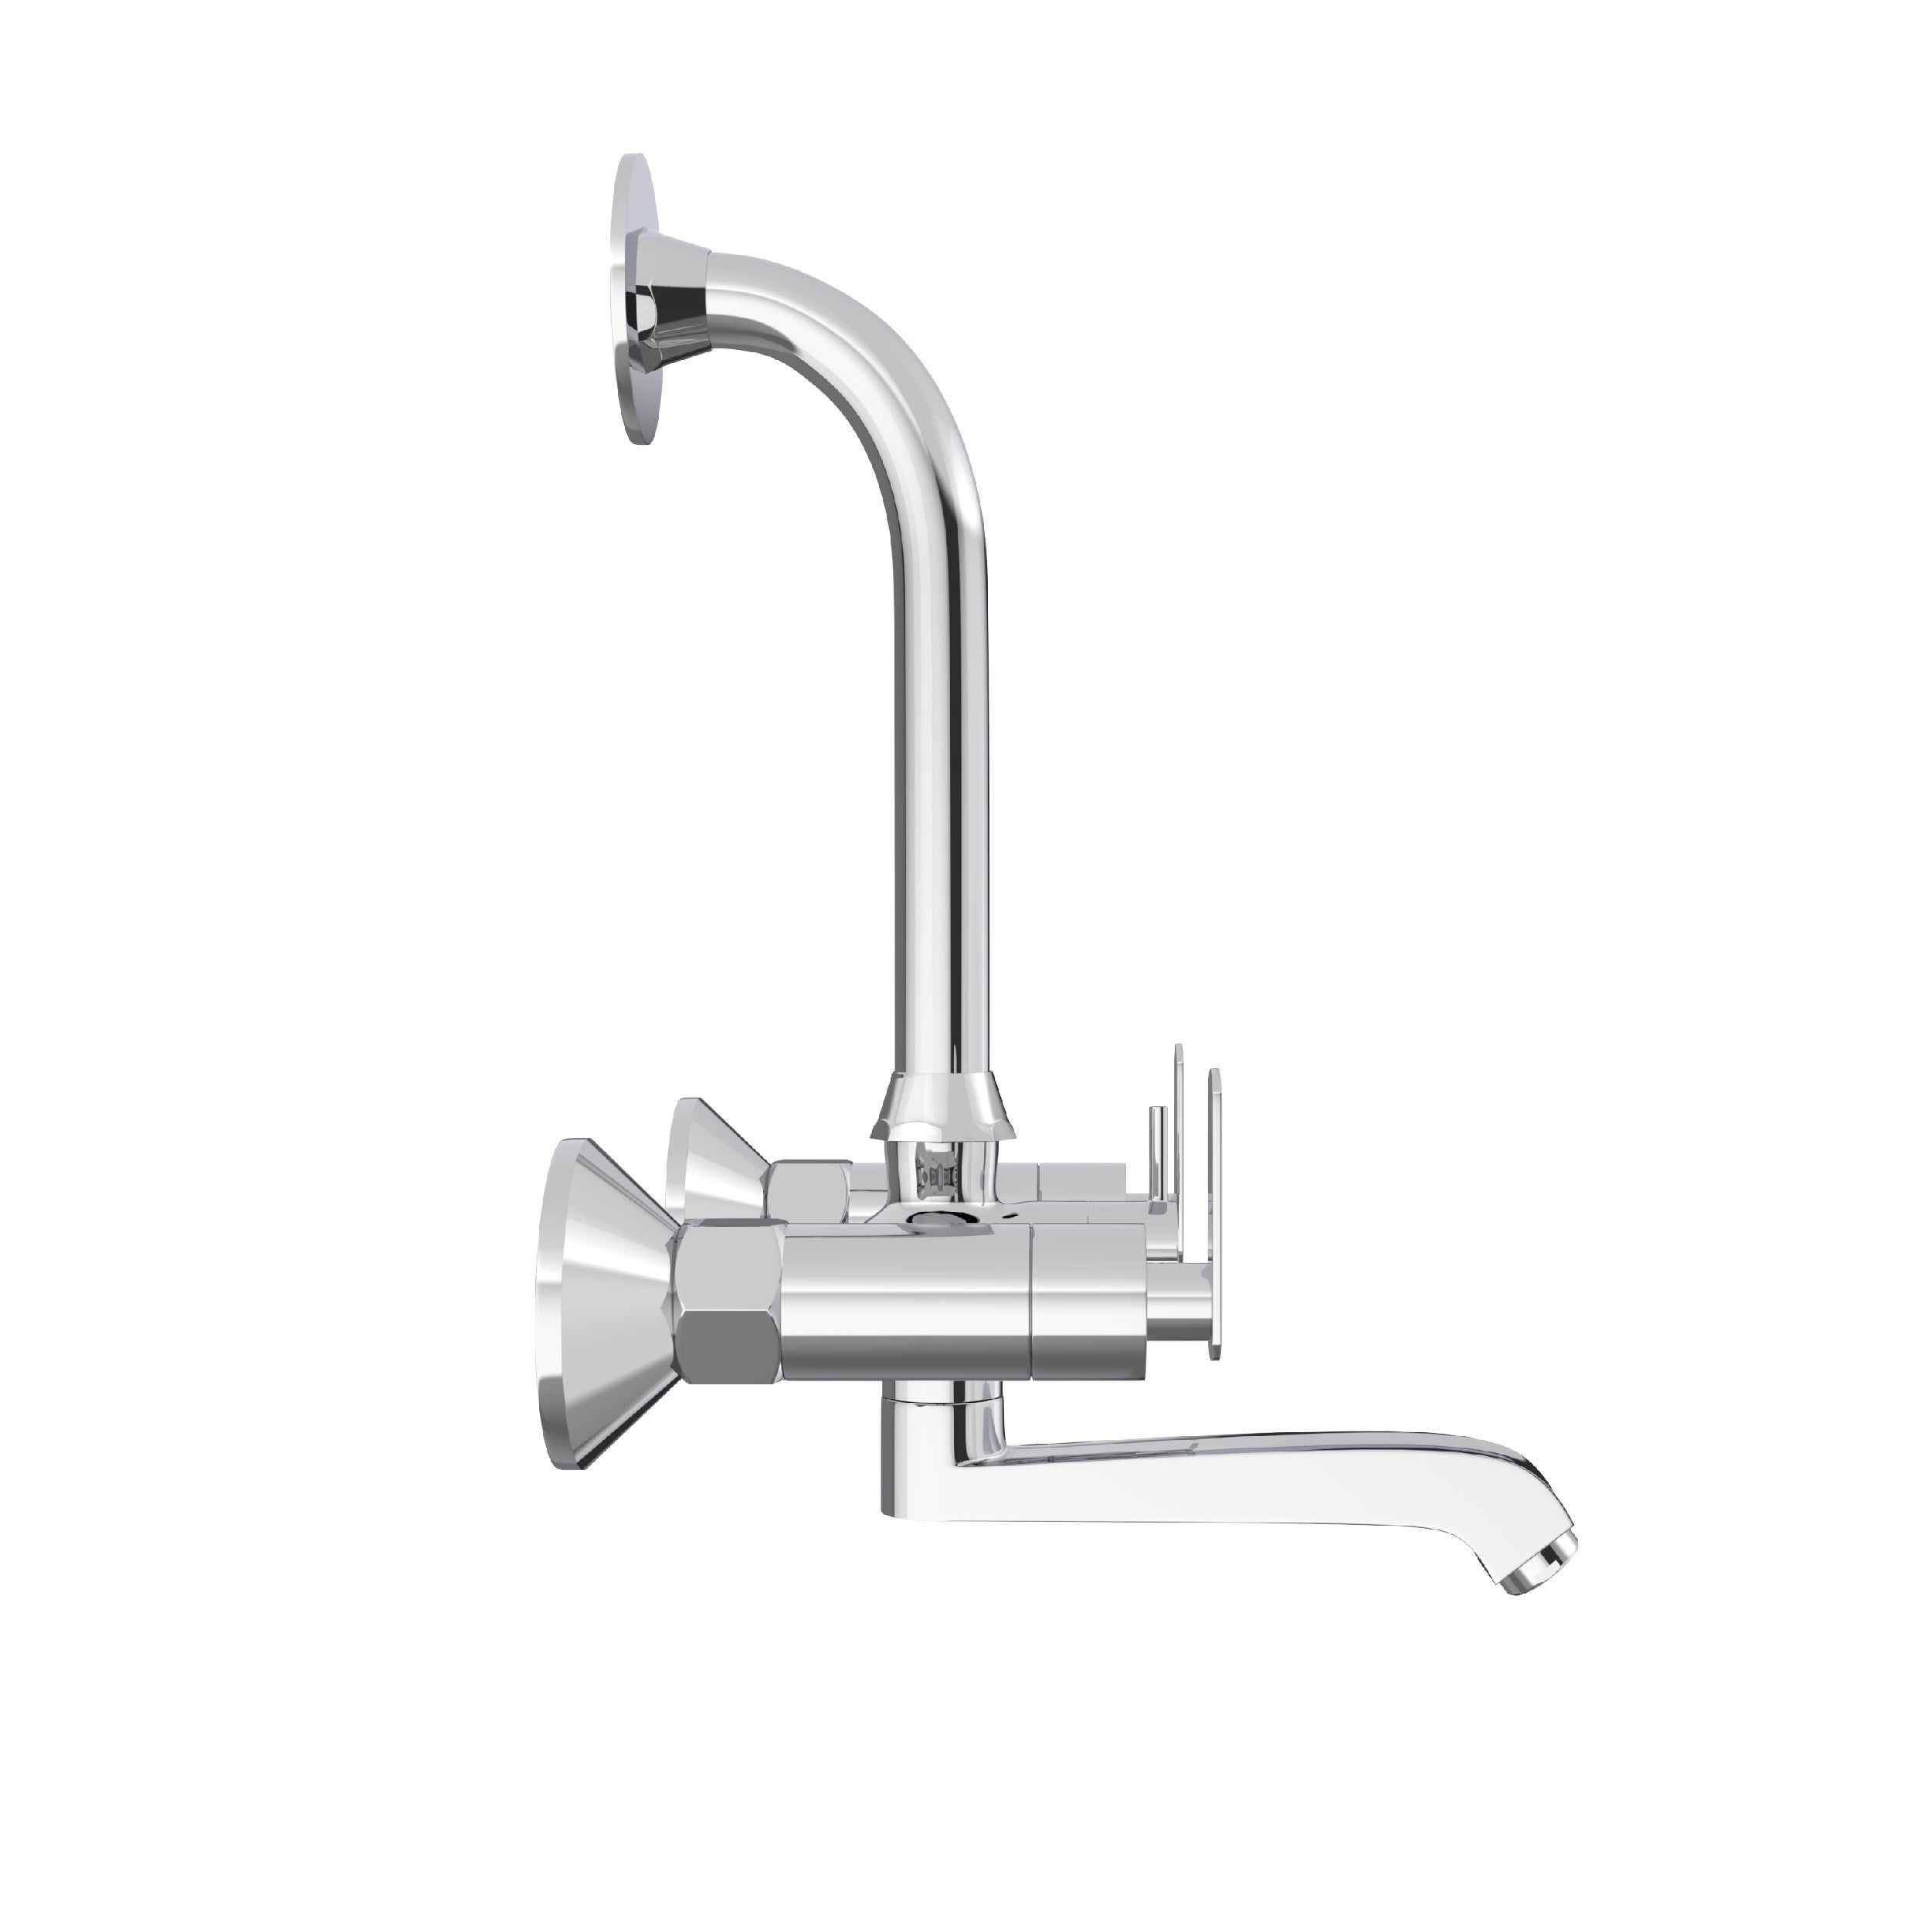 Chrome Finish Handle Wall Mixer with L Bend Faucet Tap Bib